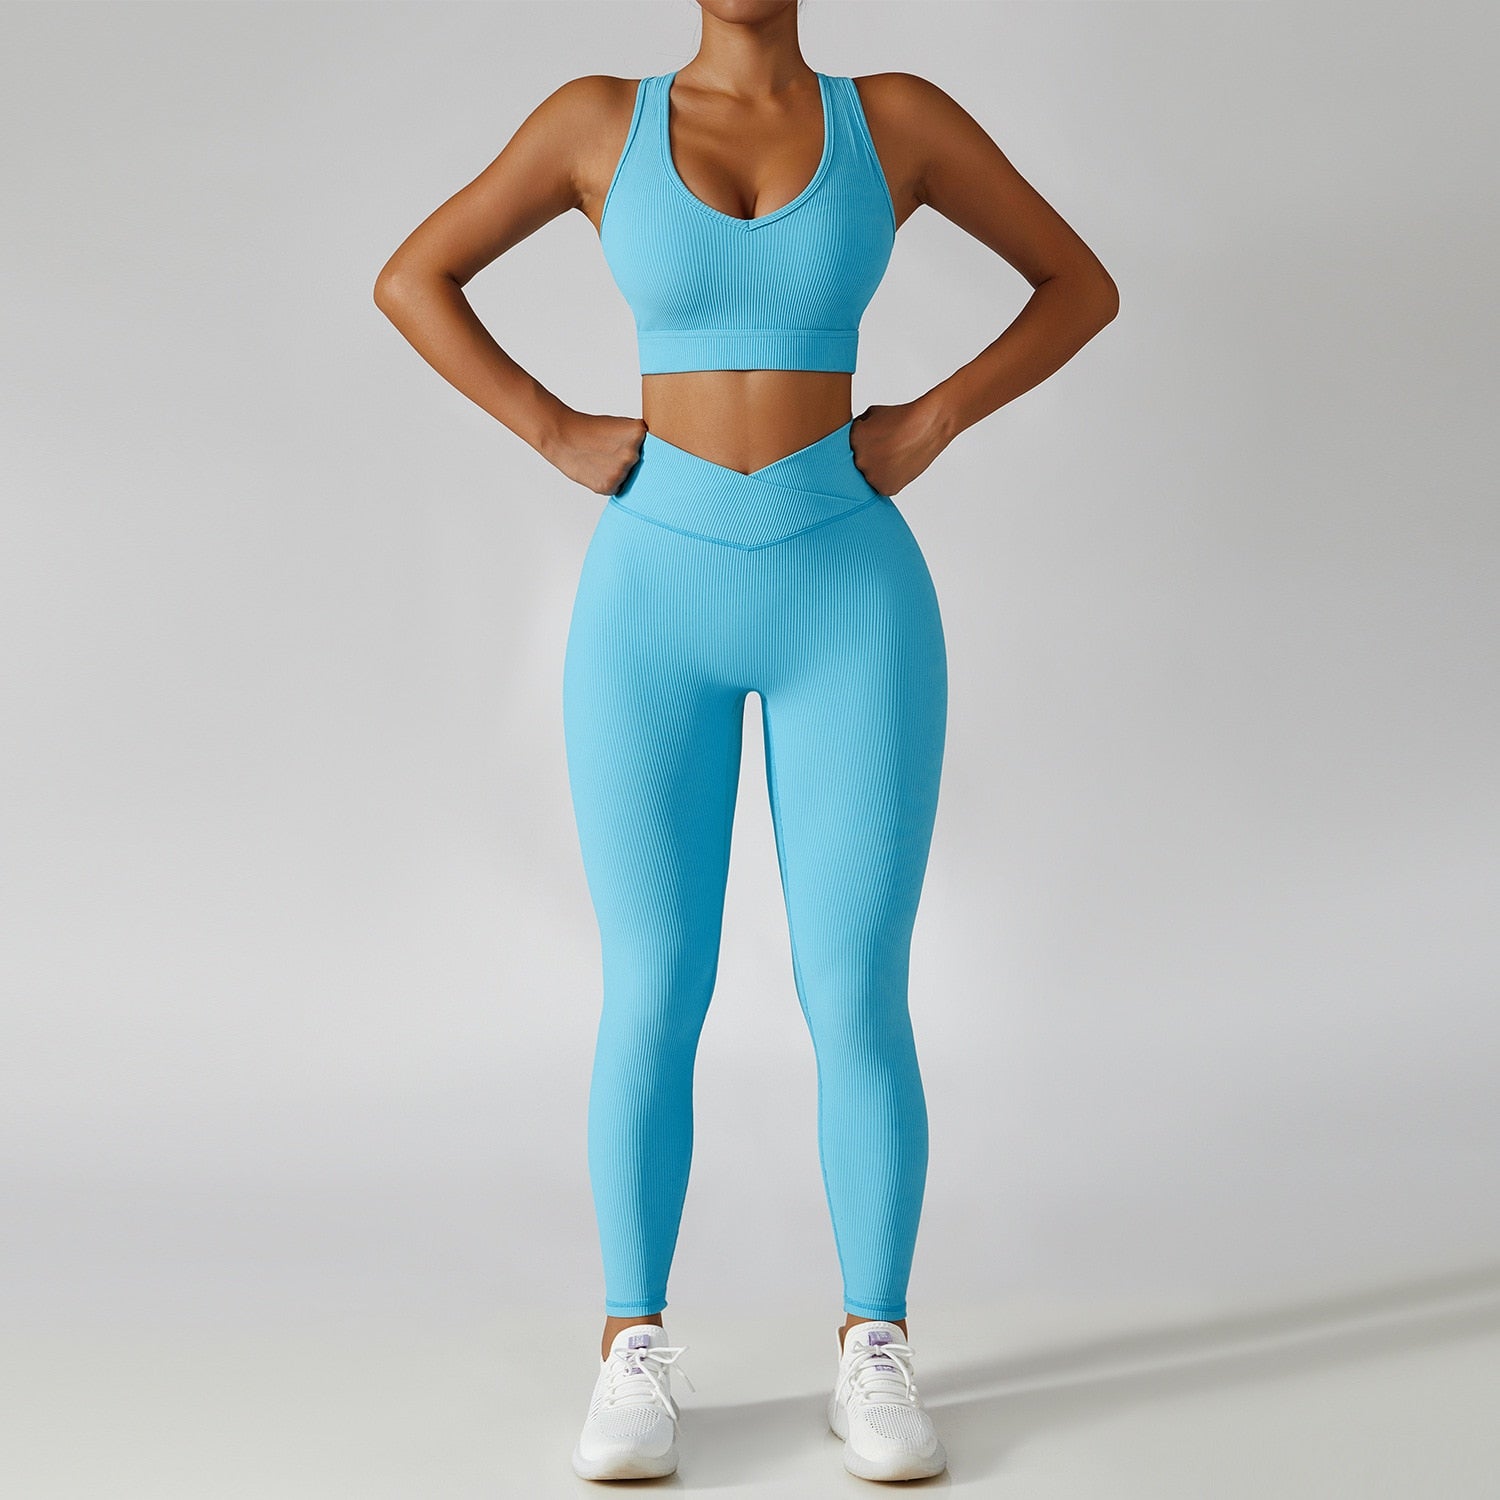 Women's Two Piece Blue Ribbed Modern Athletic Sports Bra High Waisted Yoga Leggings Workout Set